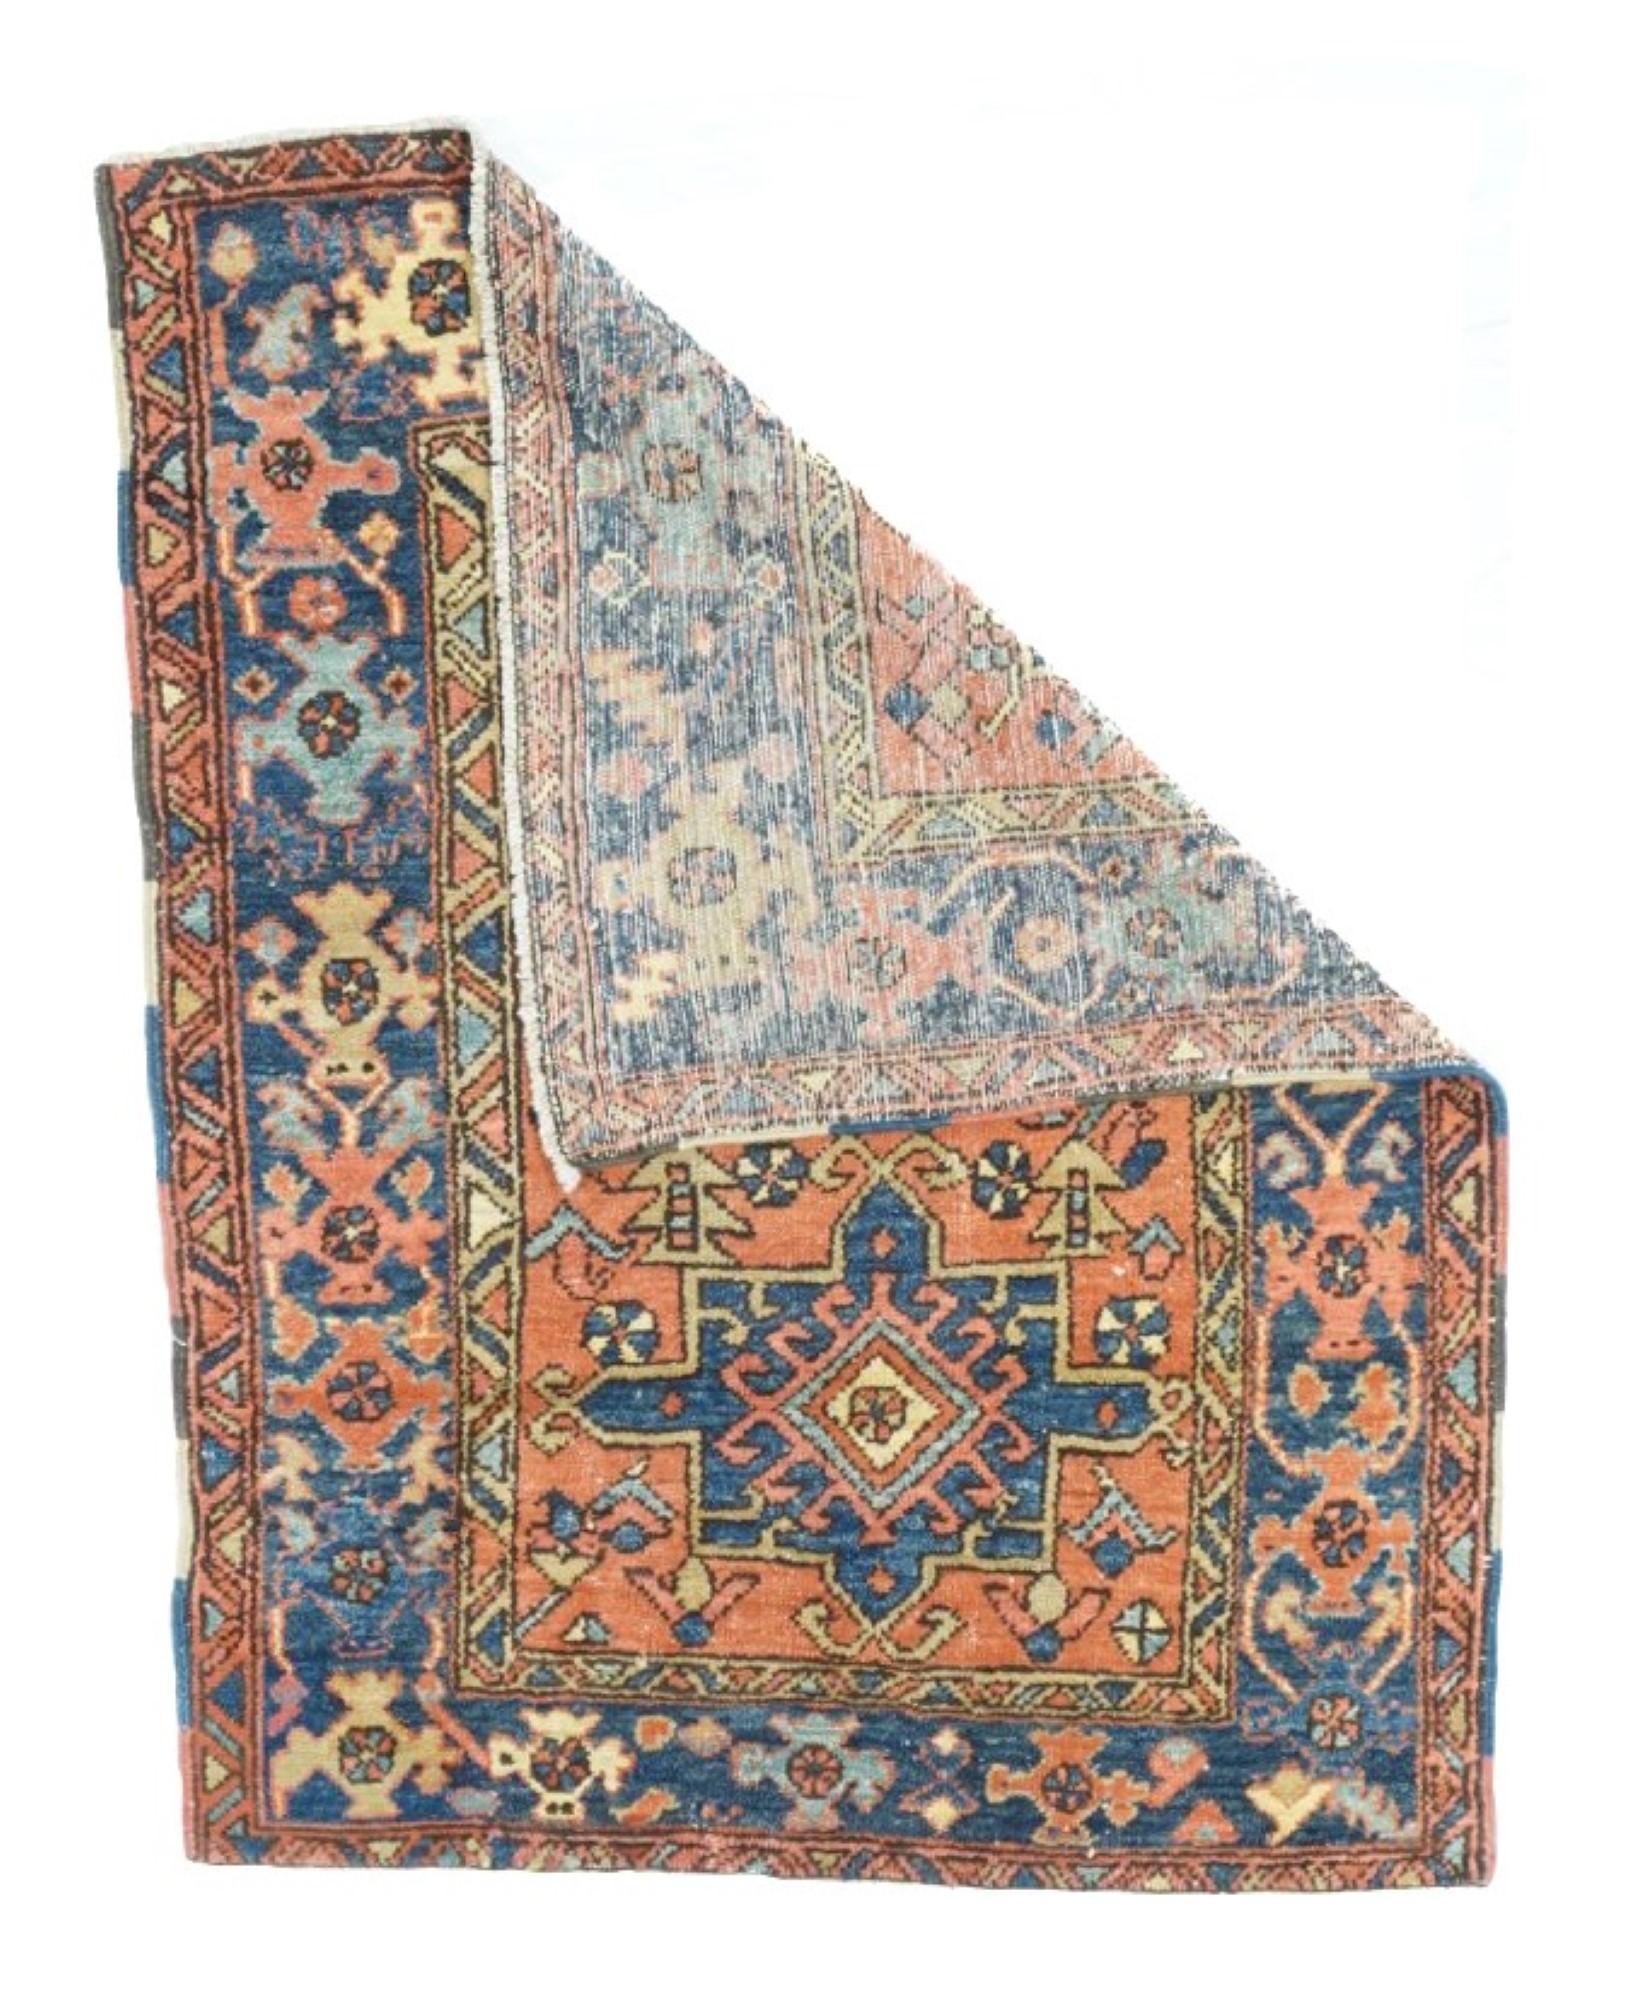 Antique Heriz Rug 3'3'' x 4'2''. Soft rust/terra cotta field with two royal blue Karaja-style octogrammes, and small flowers and geometric devices loosely scattered. Abrashed sapphire strip-style border with rough cross and turtle mixes. Cotton